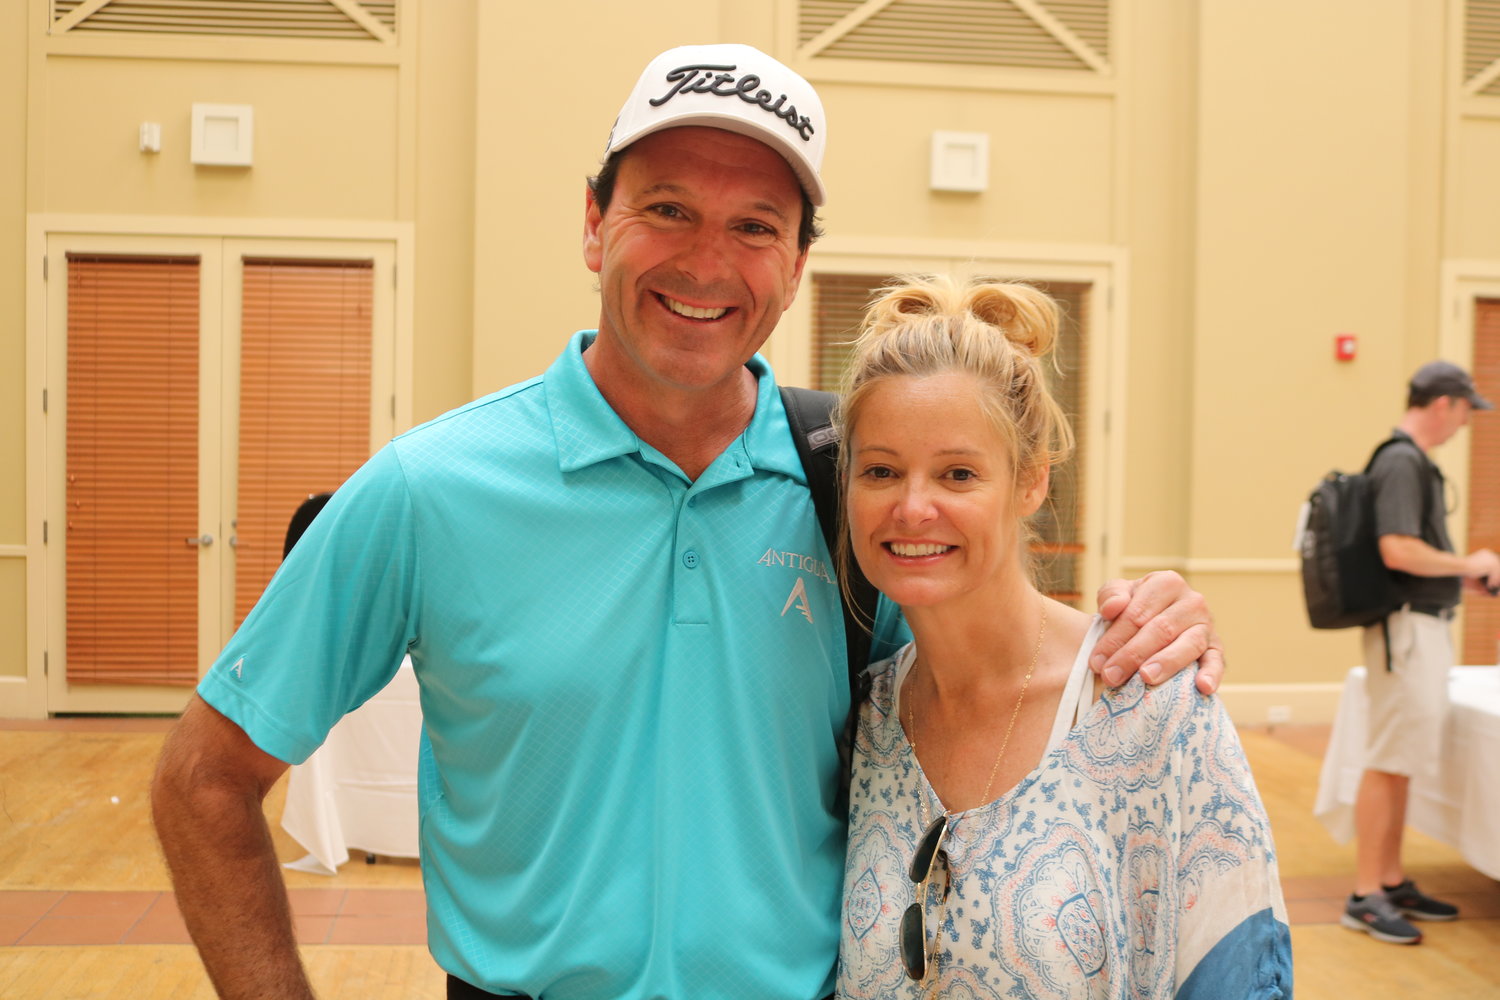 Len Mattiace and Tabitha Furyk at the golf tournament at Sawgrass Country Club